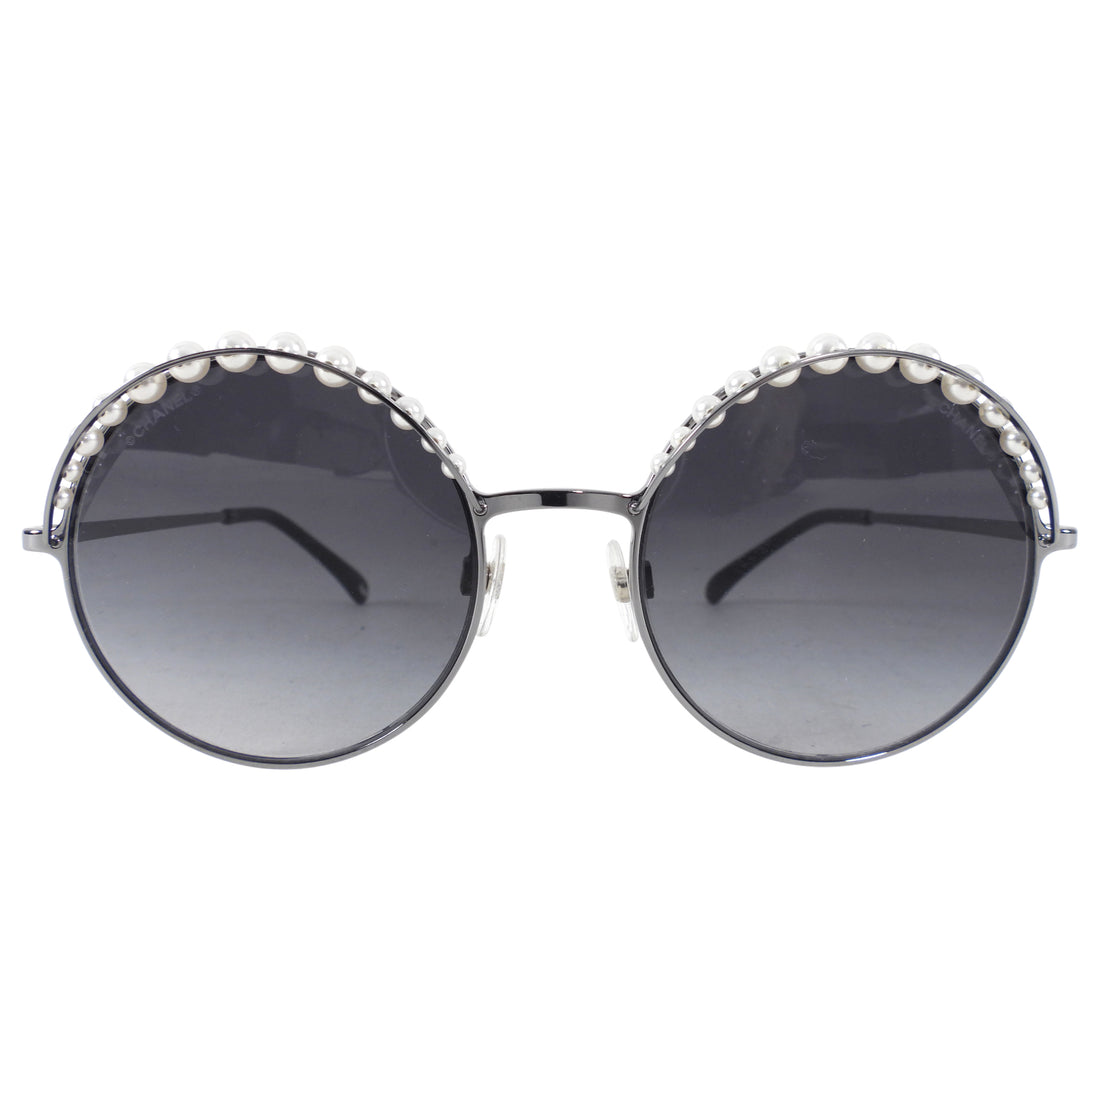 Chanel 4234 Round Ruthenium Pearl Sunglasses – I MISS YOU VINTAGE